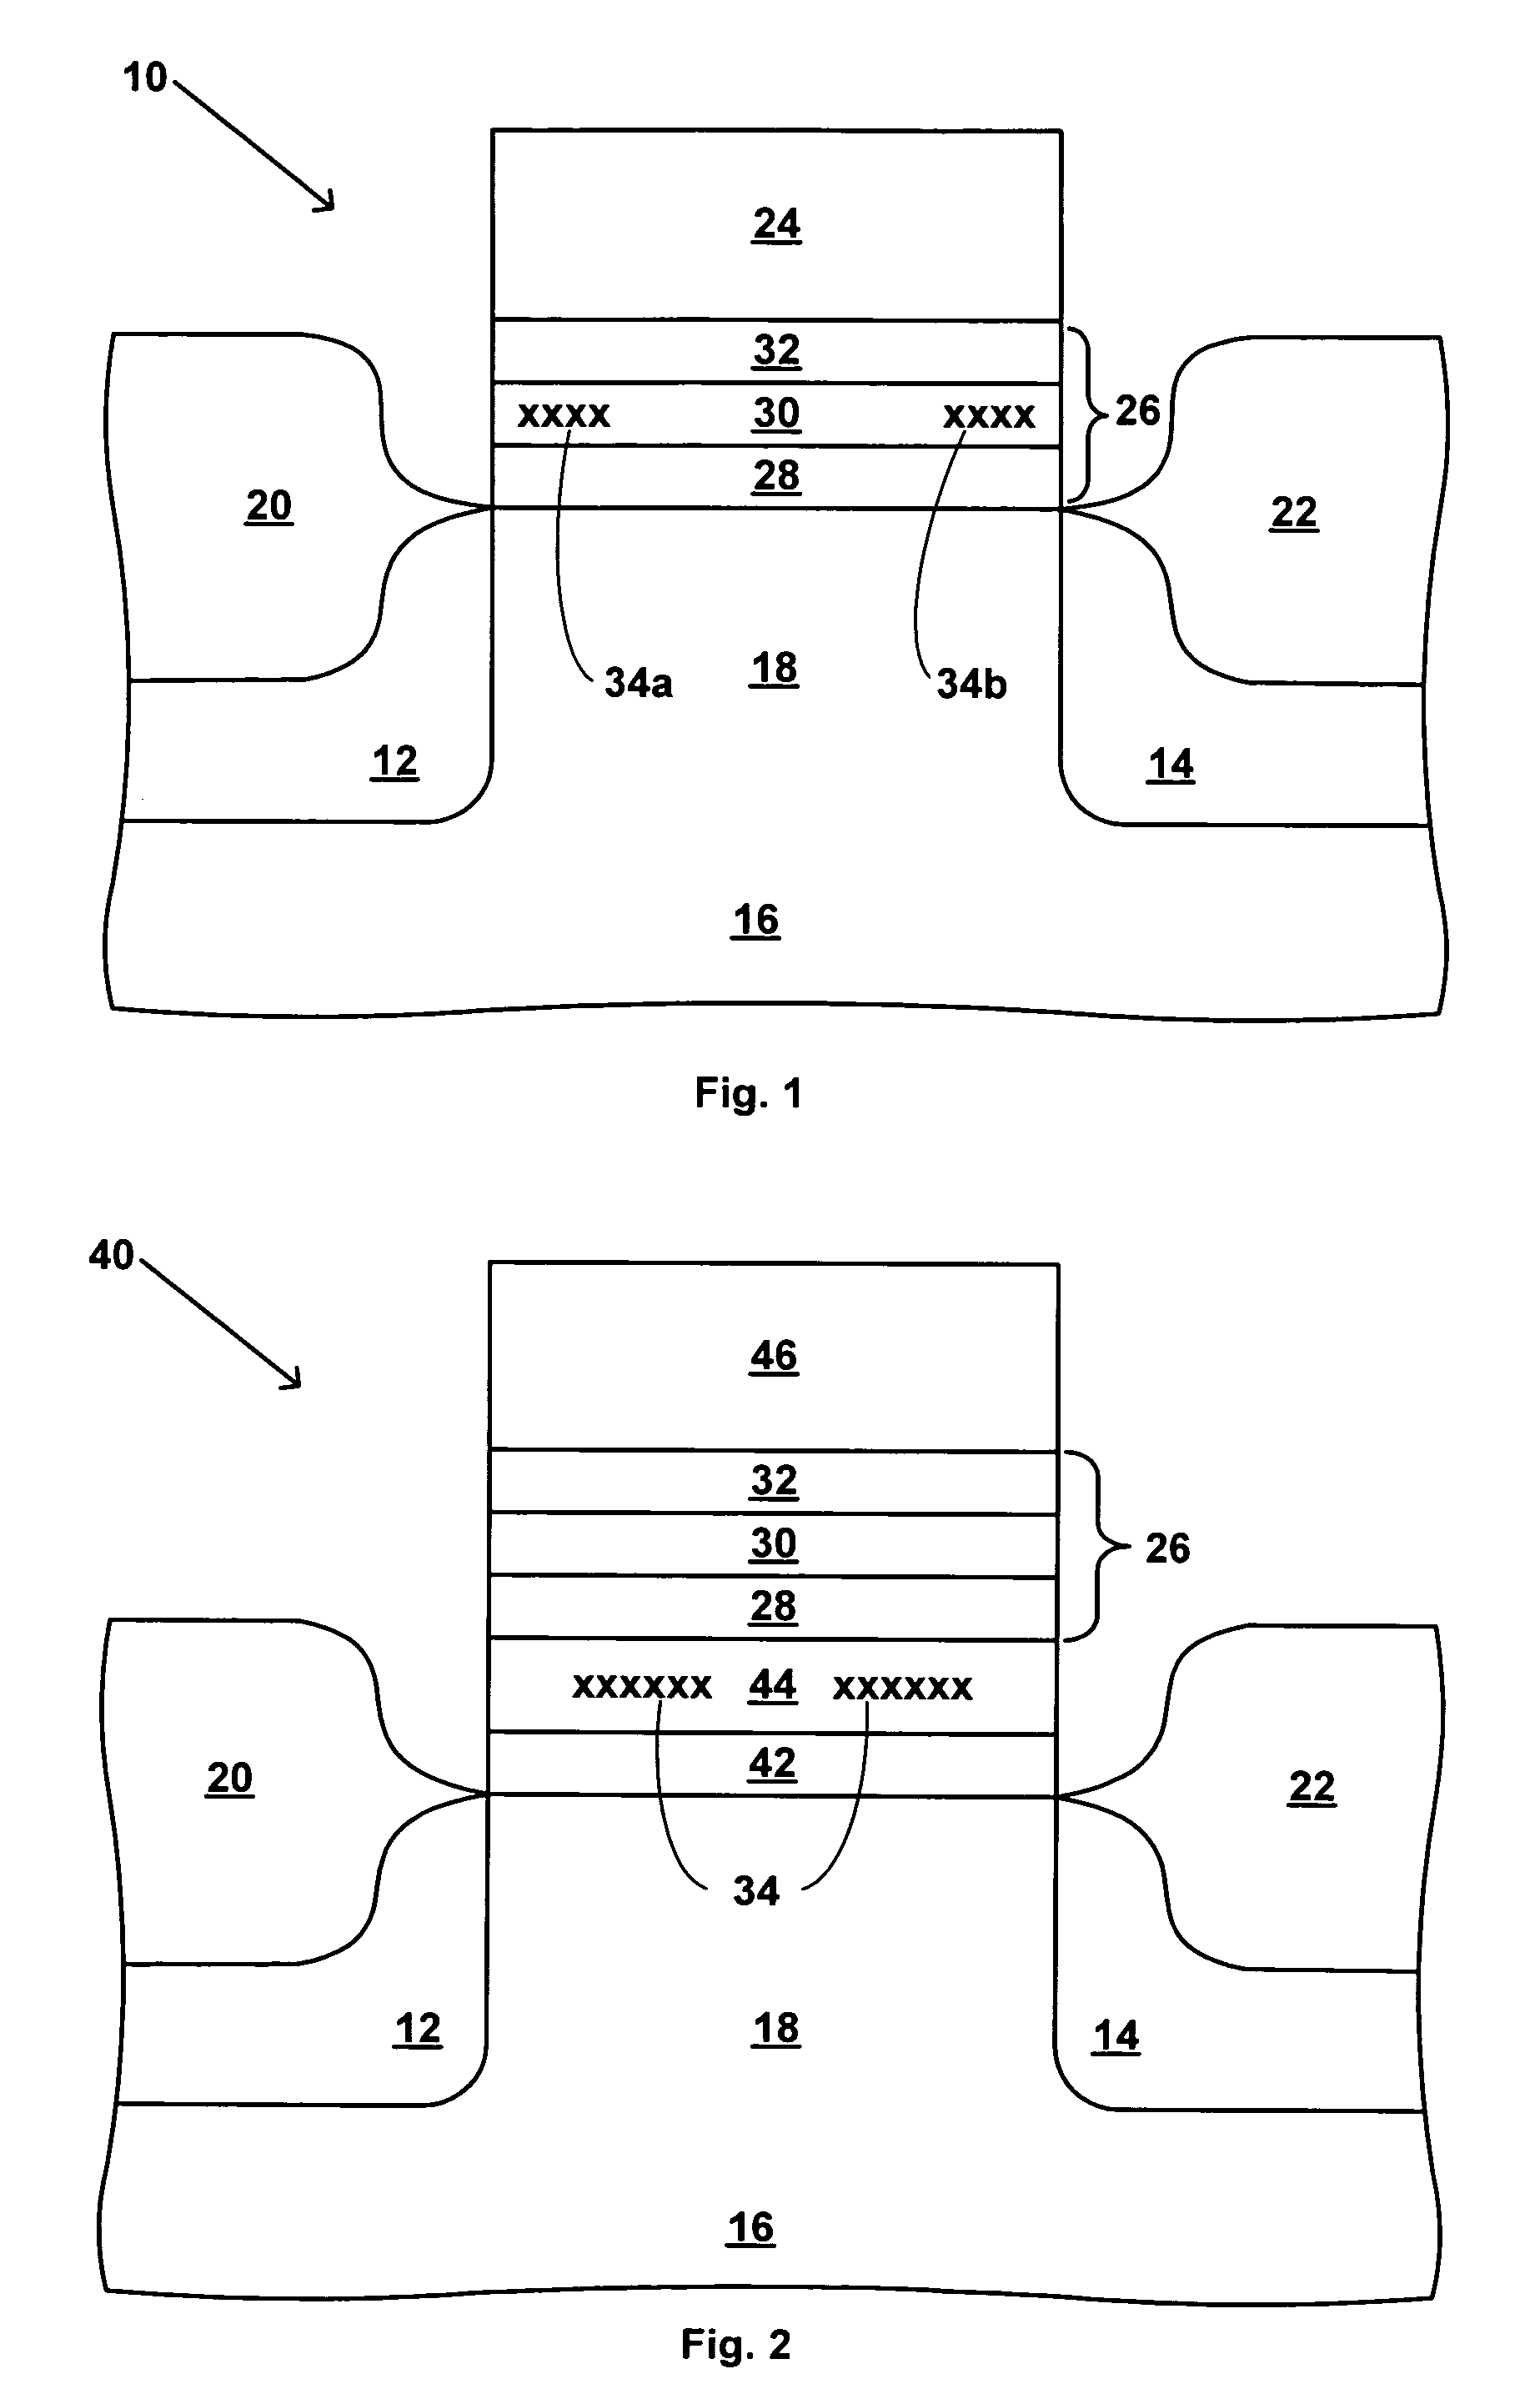 Integrated ONO processing for semiconductor devices using in-situ steam generation (ISSG) process